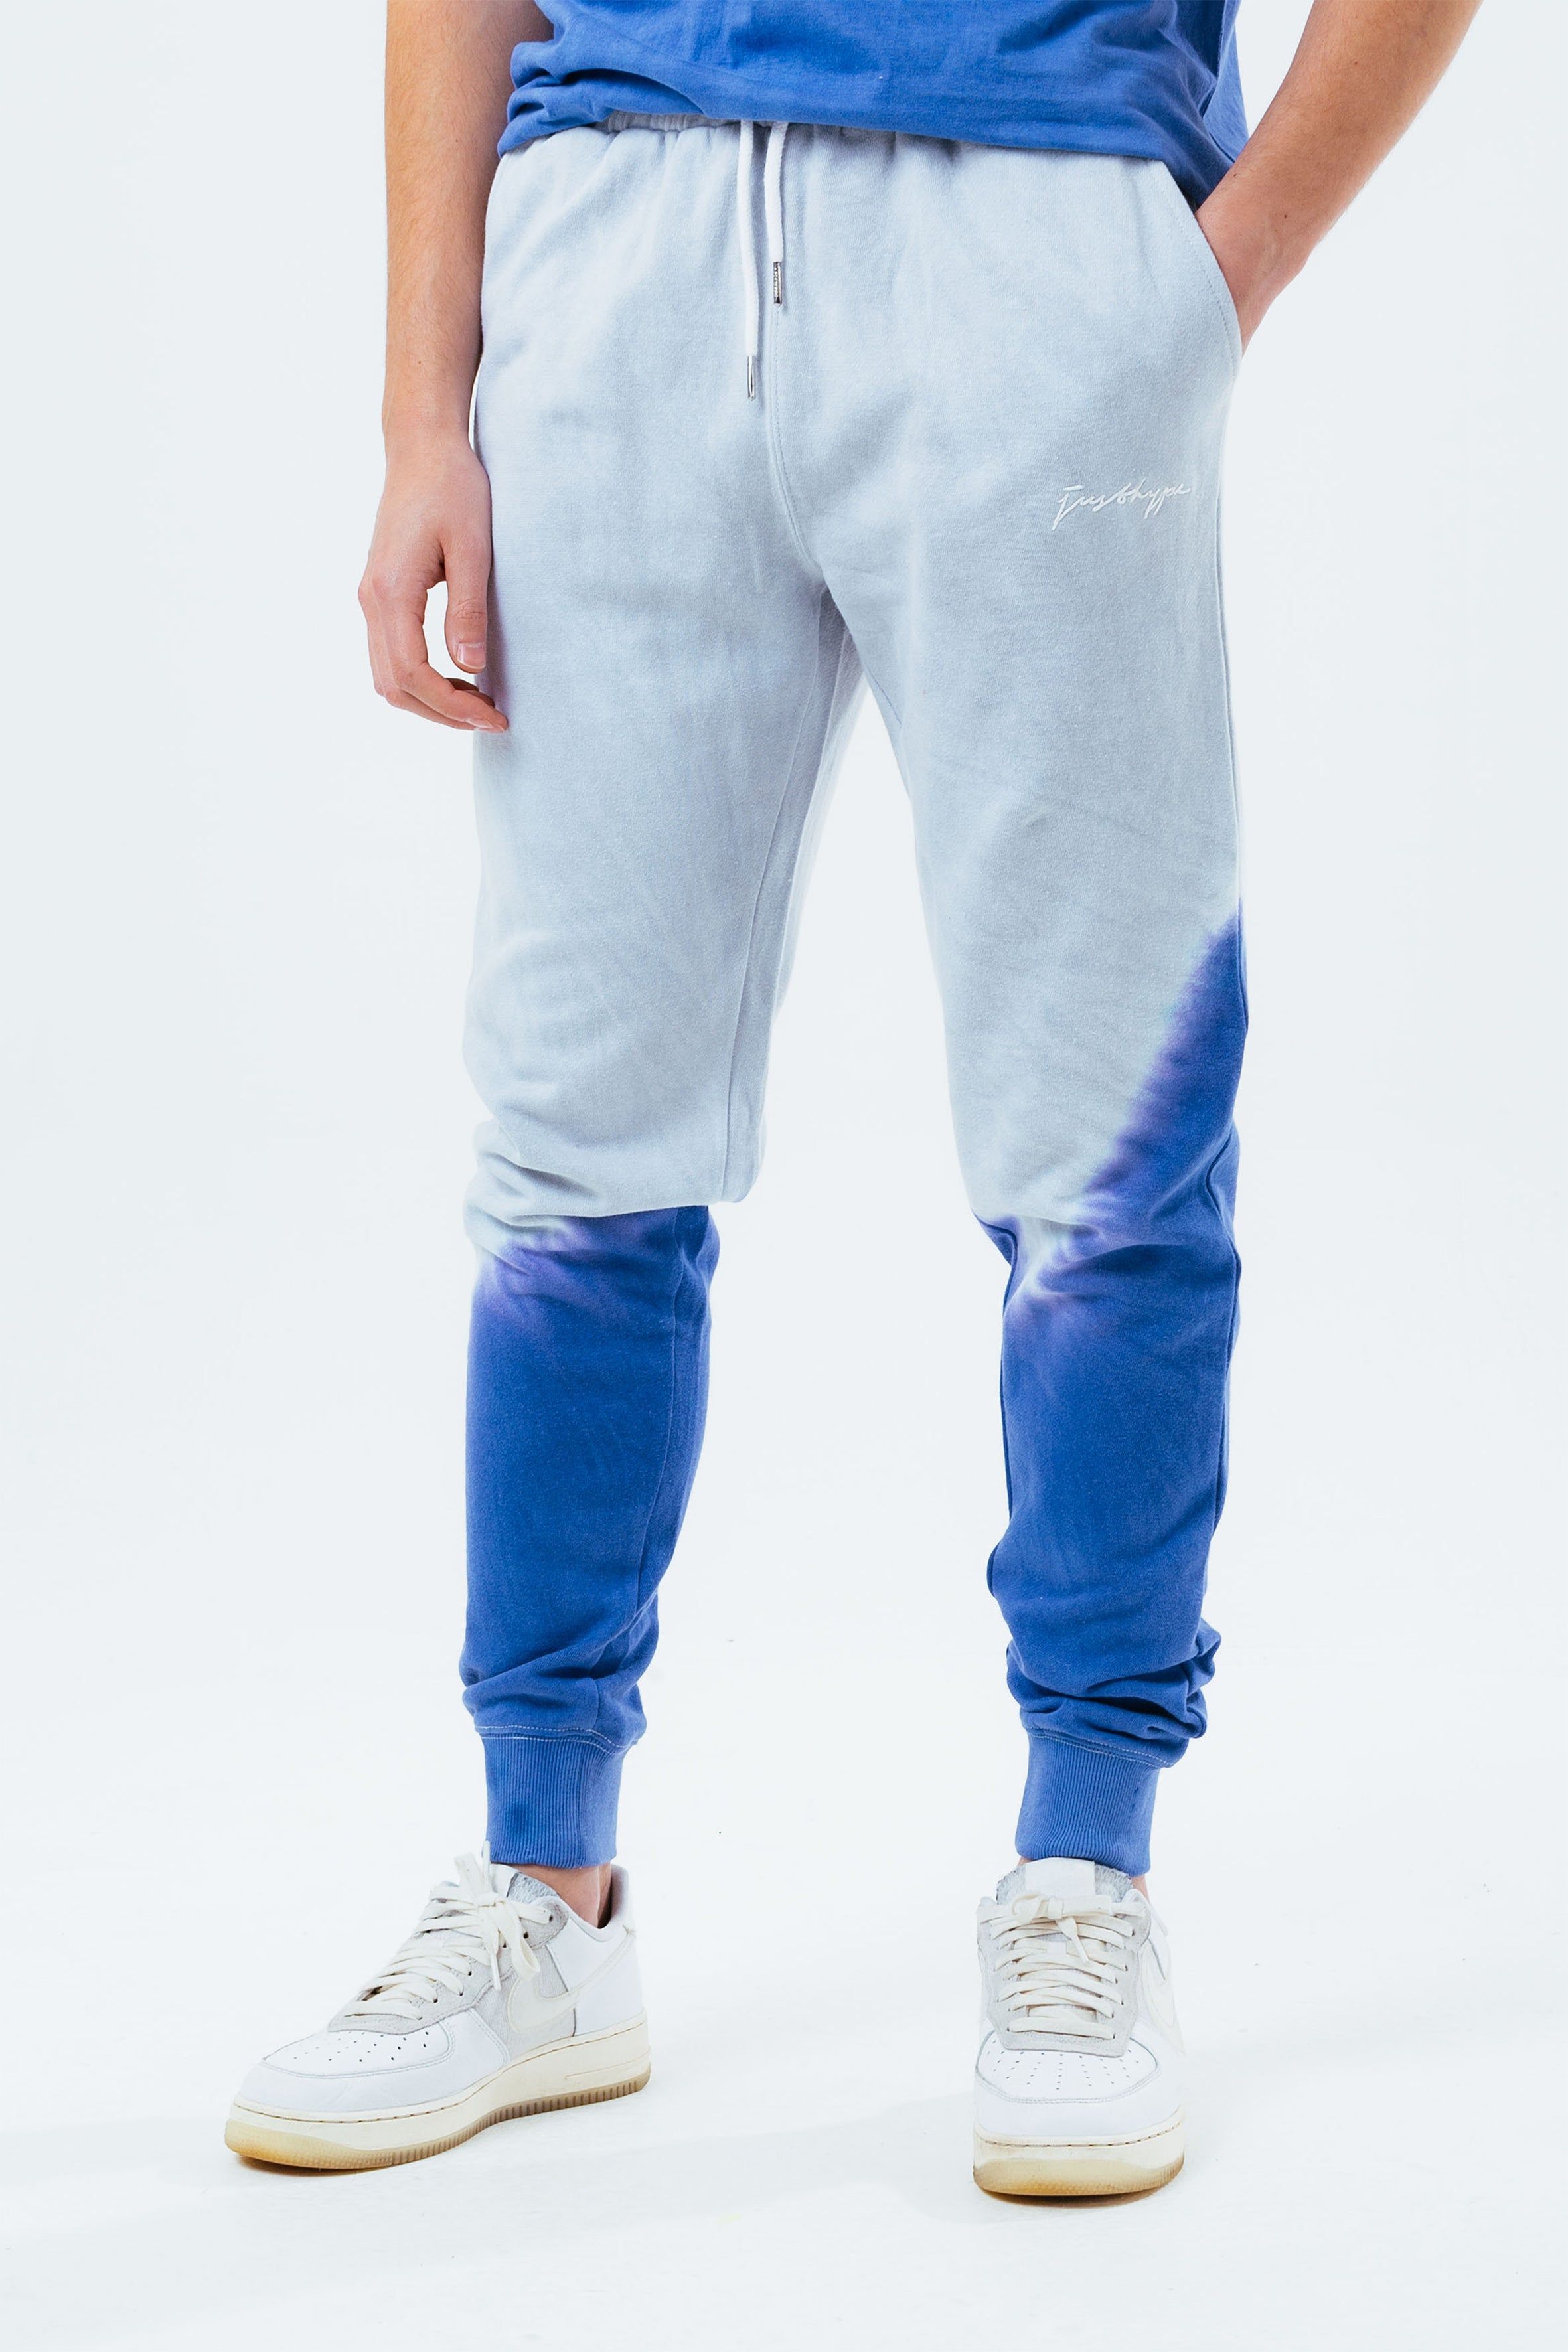 Stay on trend with the Hype Grey Navy Tie Dye Scribble Logo Men's Joggers and grab the matching hoodie to complete the set. Designed in a soft-touch 70% Cotton 30% Polyester fabric base with the supreme amount of comfort you need from your new joggers. The design boasts an acid wash or tie-dye wash finish with an elasticated waistband, drawstring pullers and fitted cuffs. Machine wash at 30 degrees.